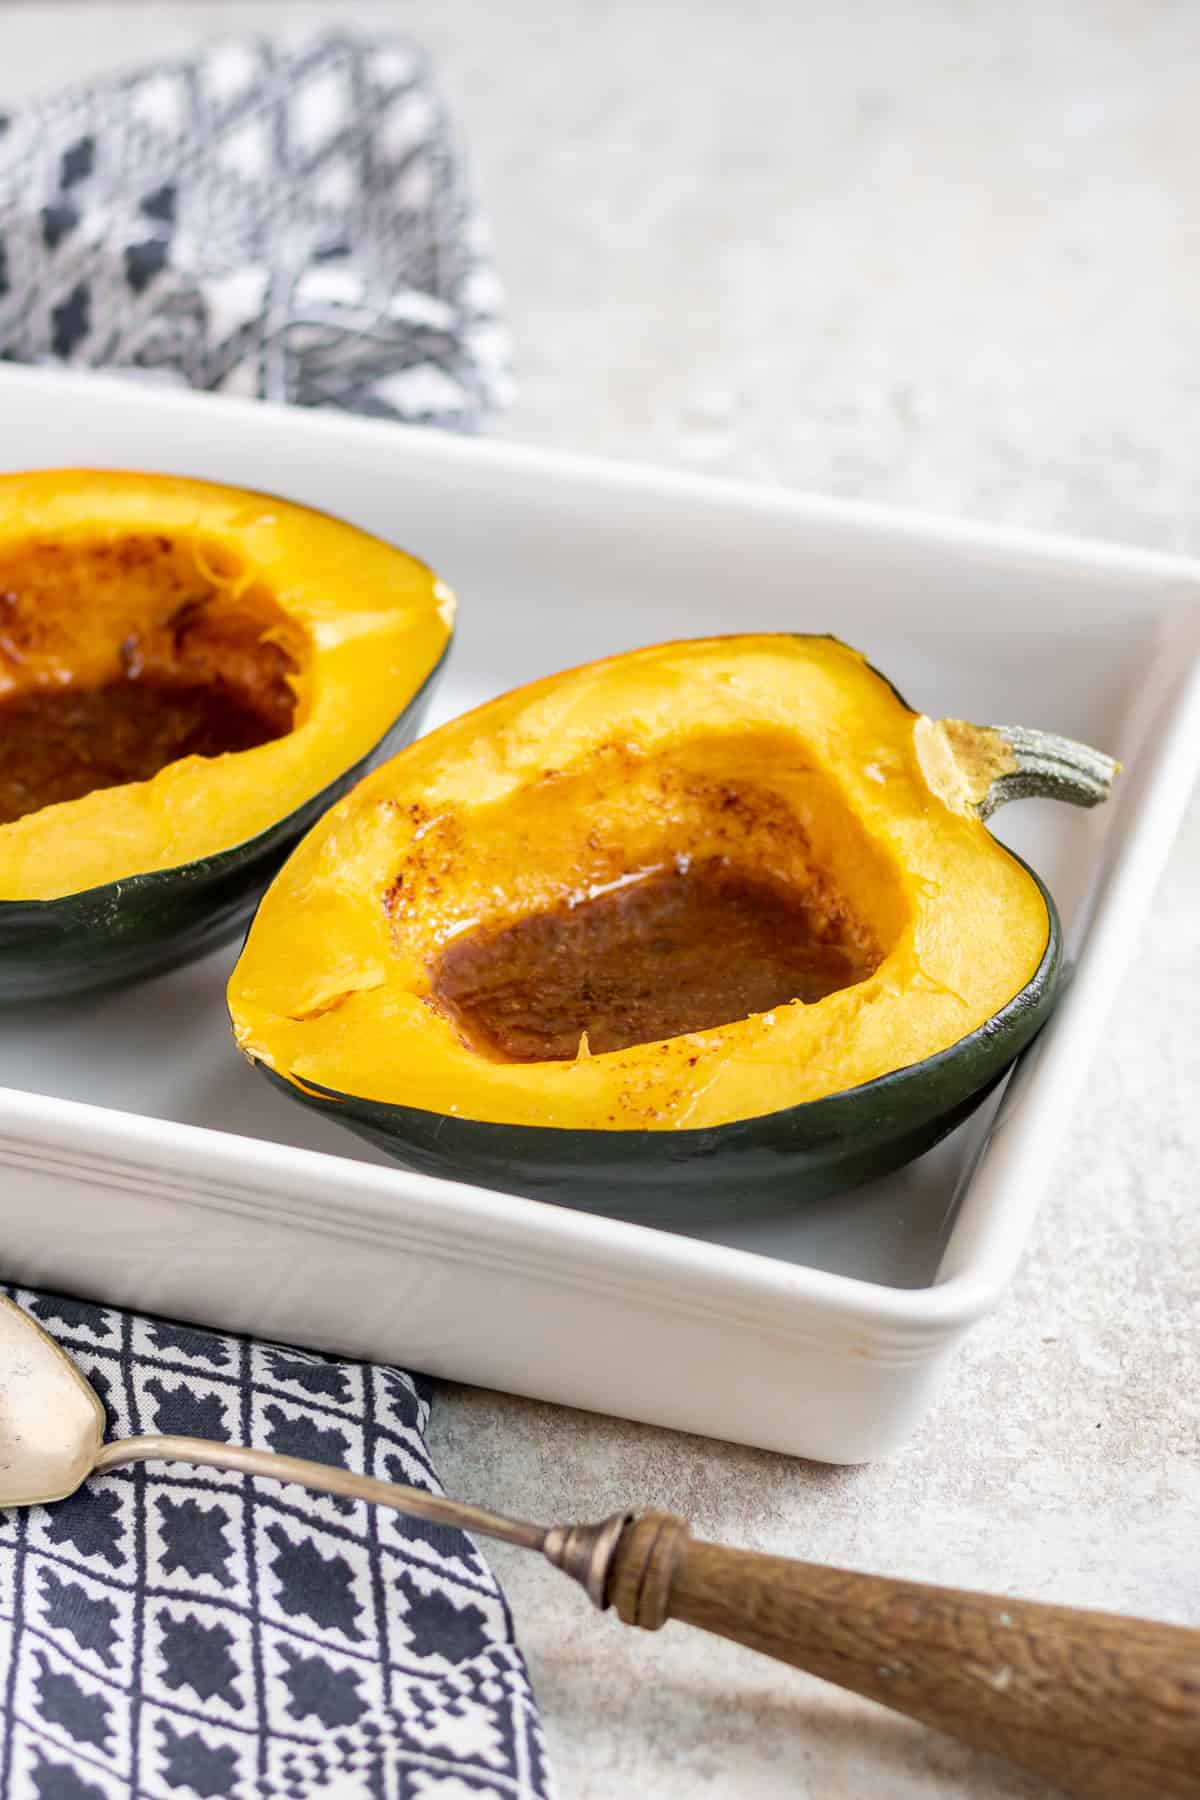 Acorn squash halves filled with brown sugar and butter.